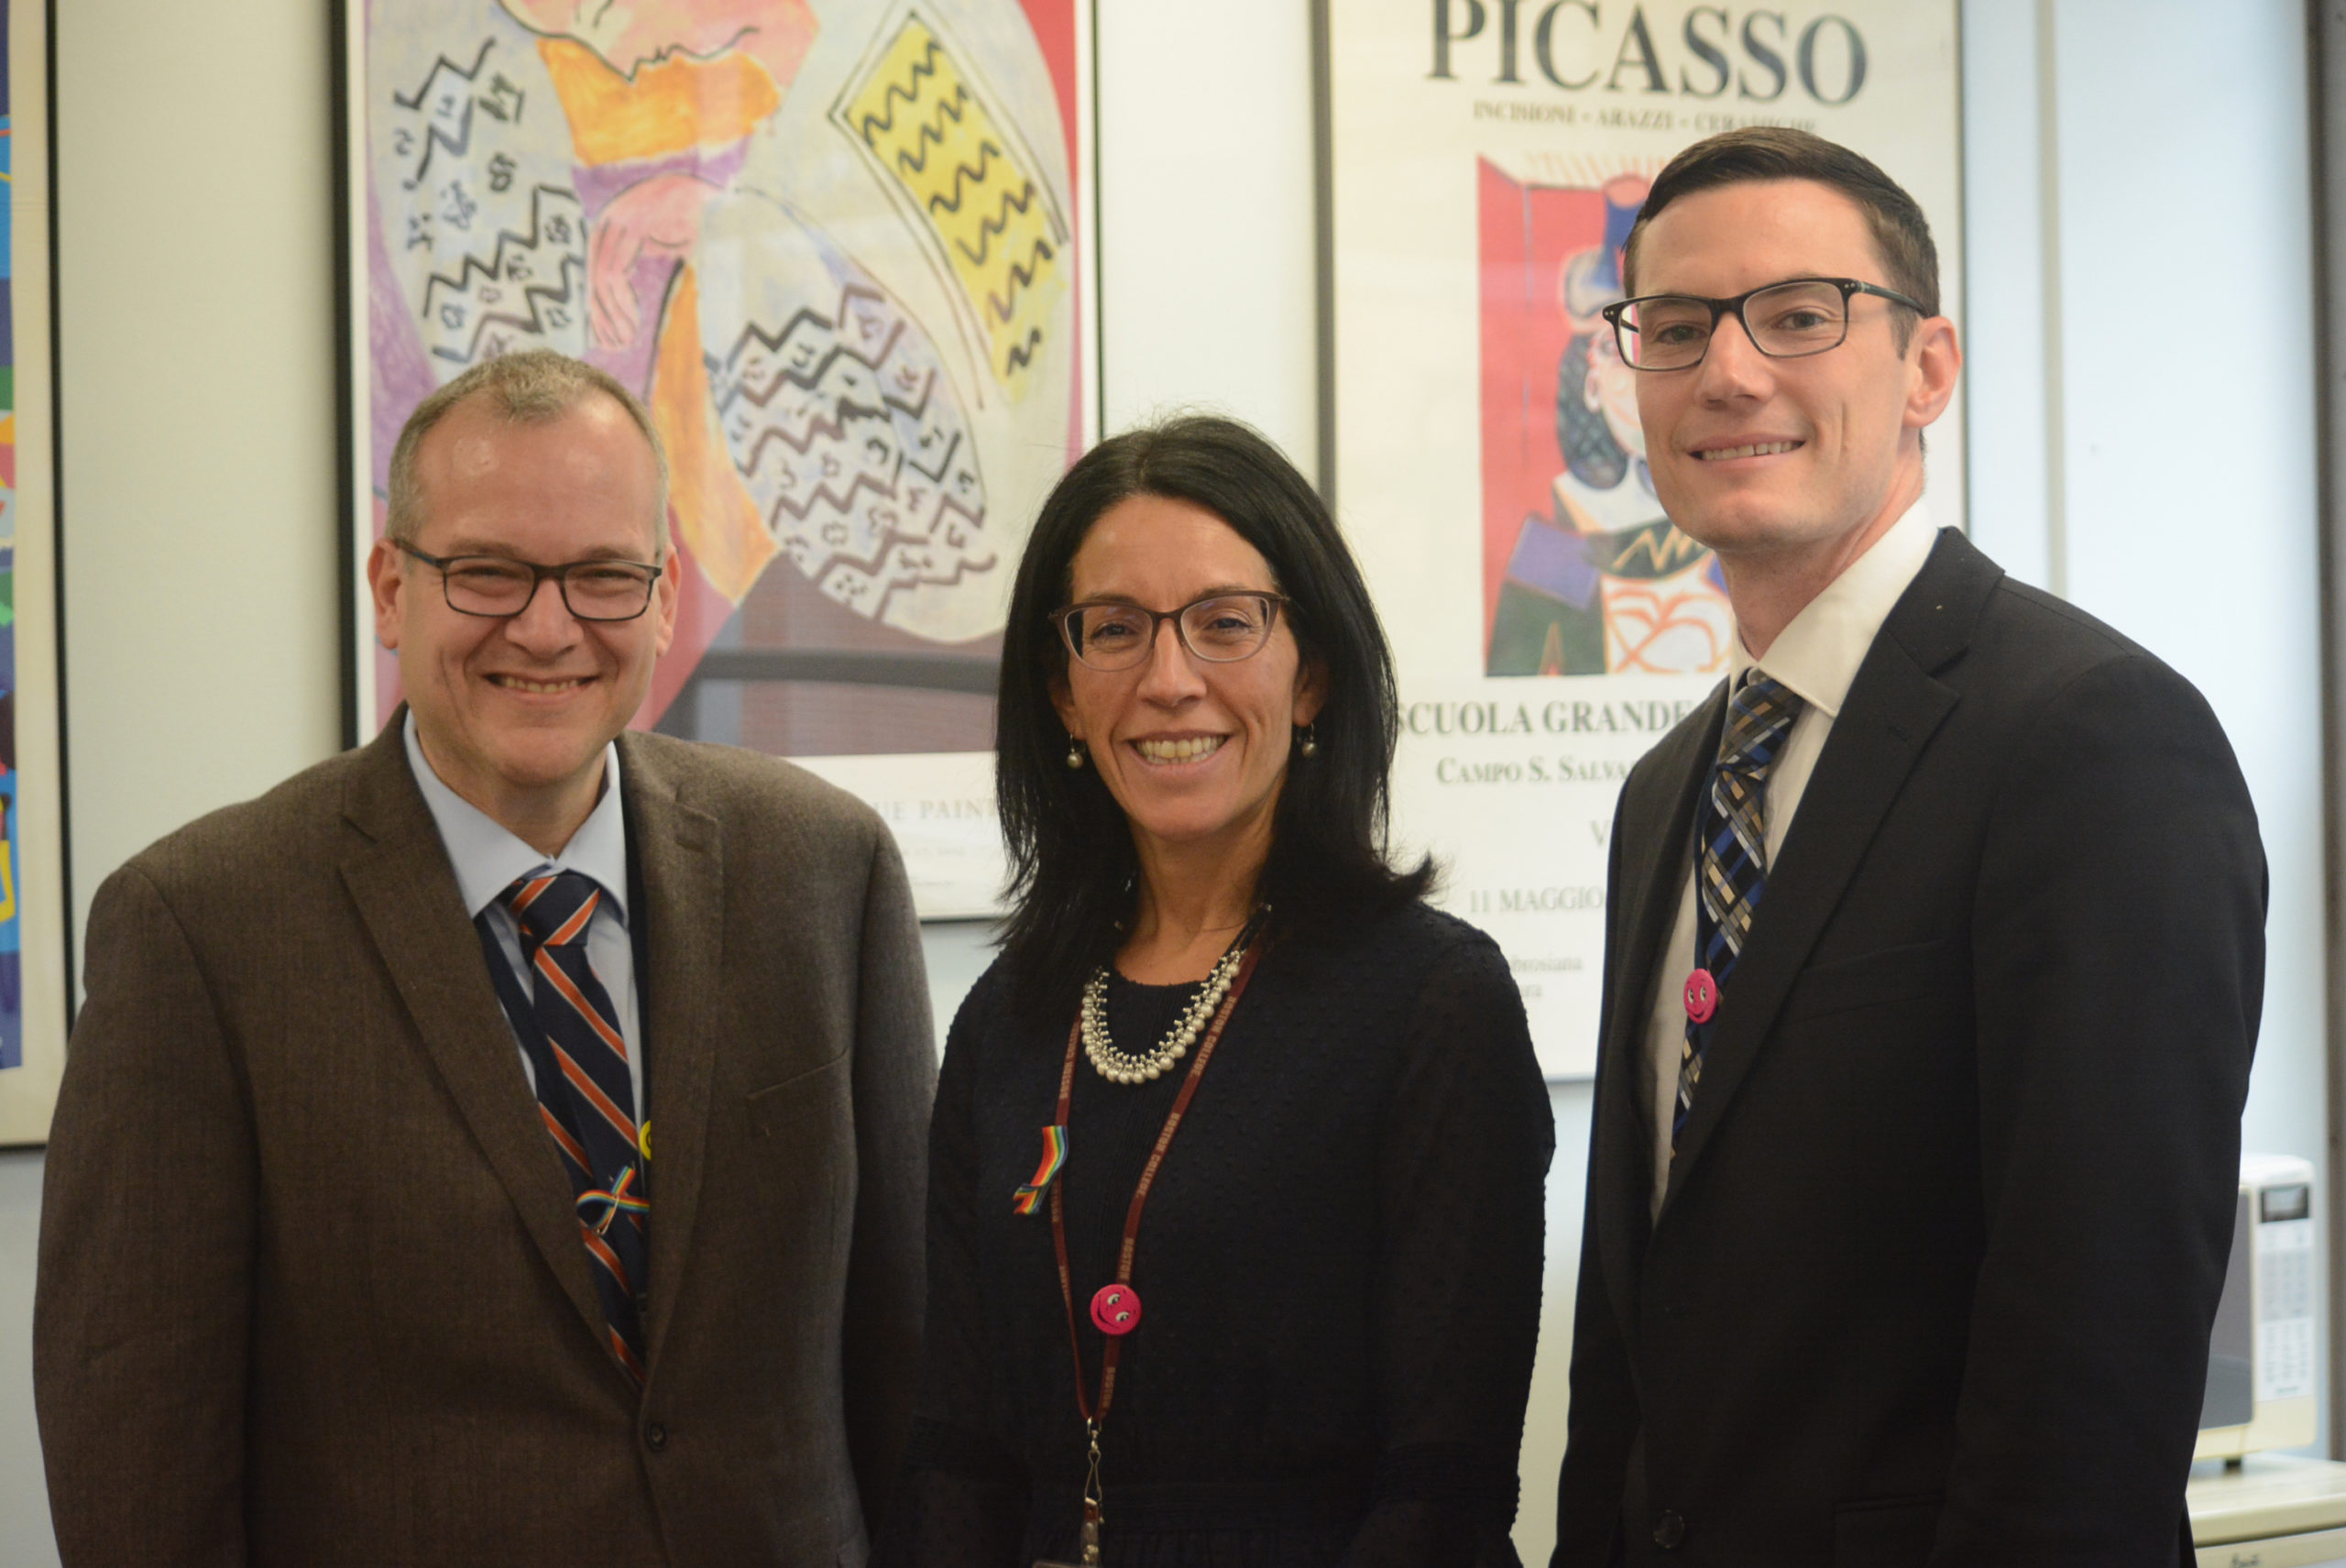 Principal Gina Cartolano and Assistant Principals Lenny DiBiase and Ryan Nadherney, the new team heading the school, said they are open to new ideas and making the school even better. (Photo by Janelle Clausen)